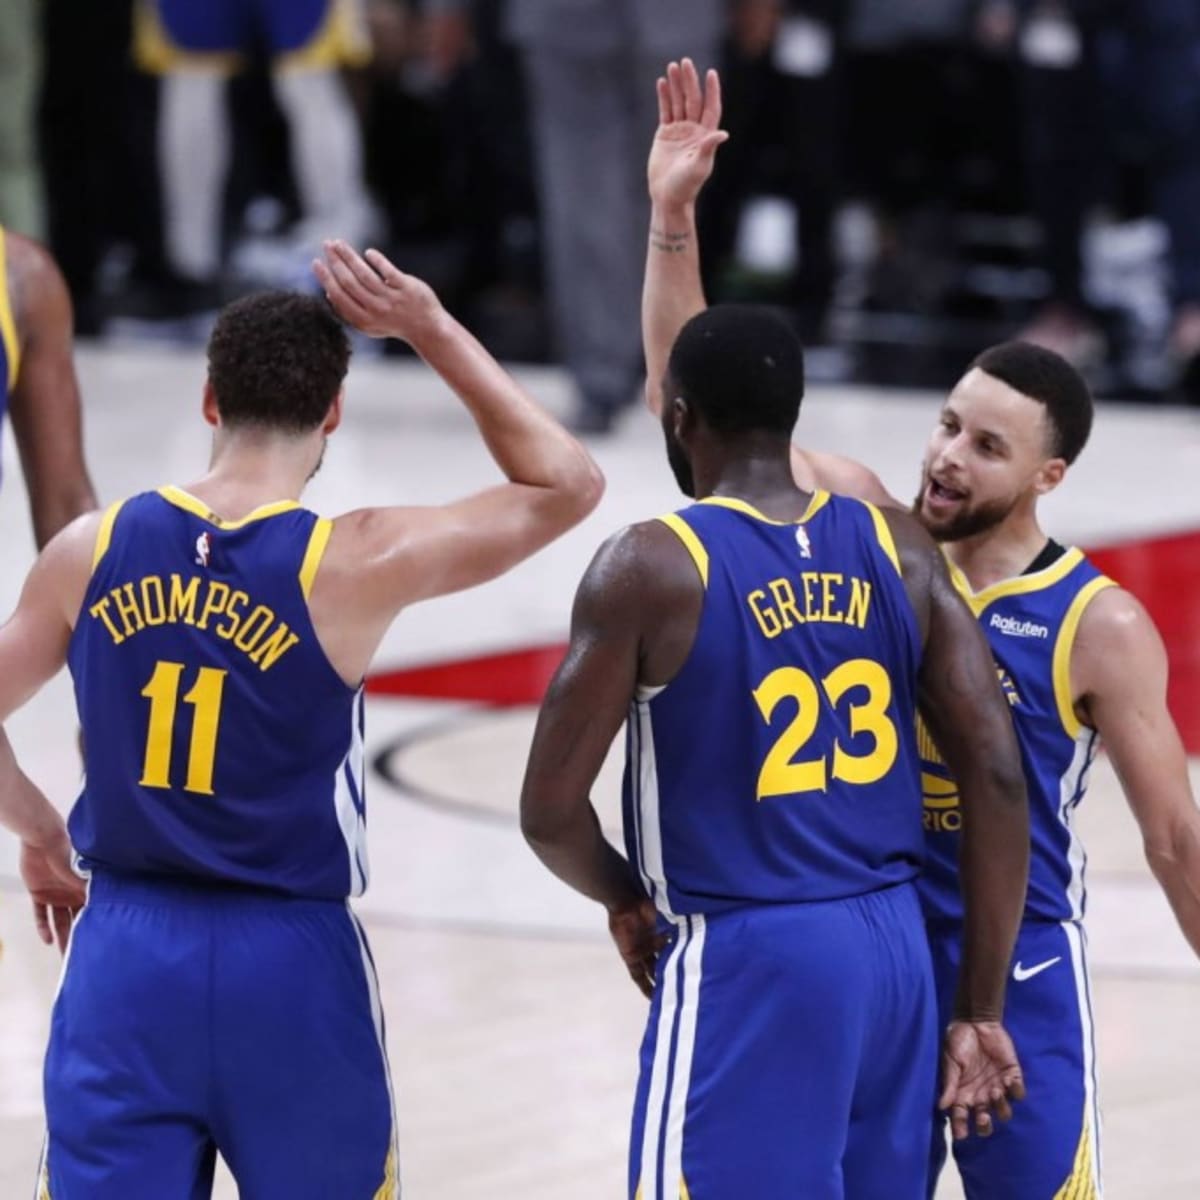 Warriors' Steph Curry sees epic 3-pointer streak come to an end